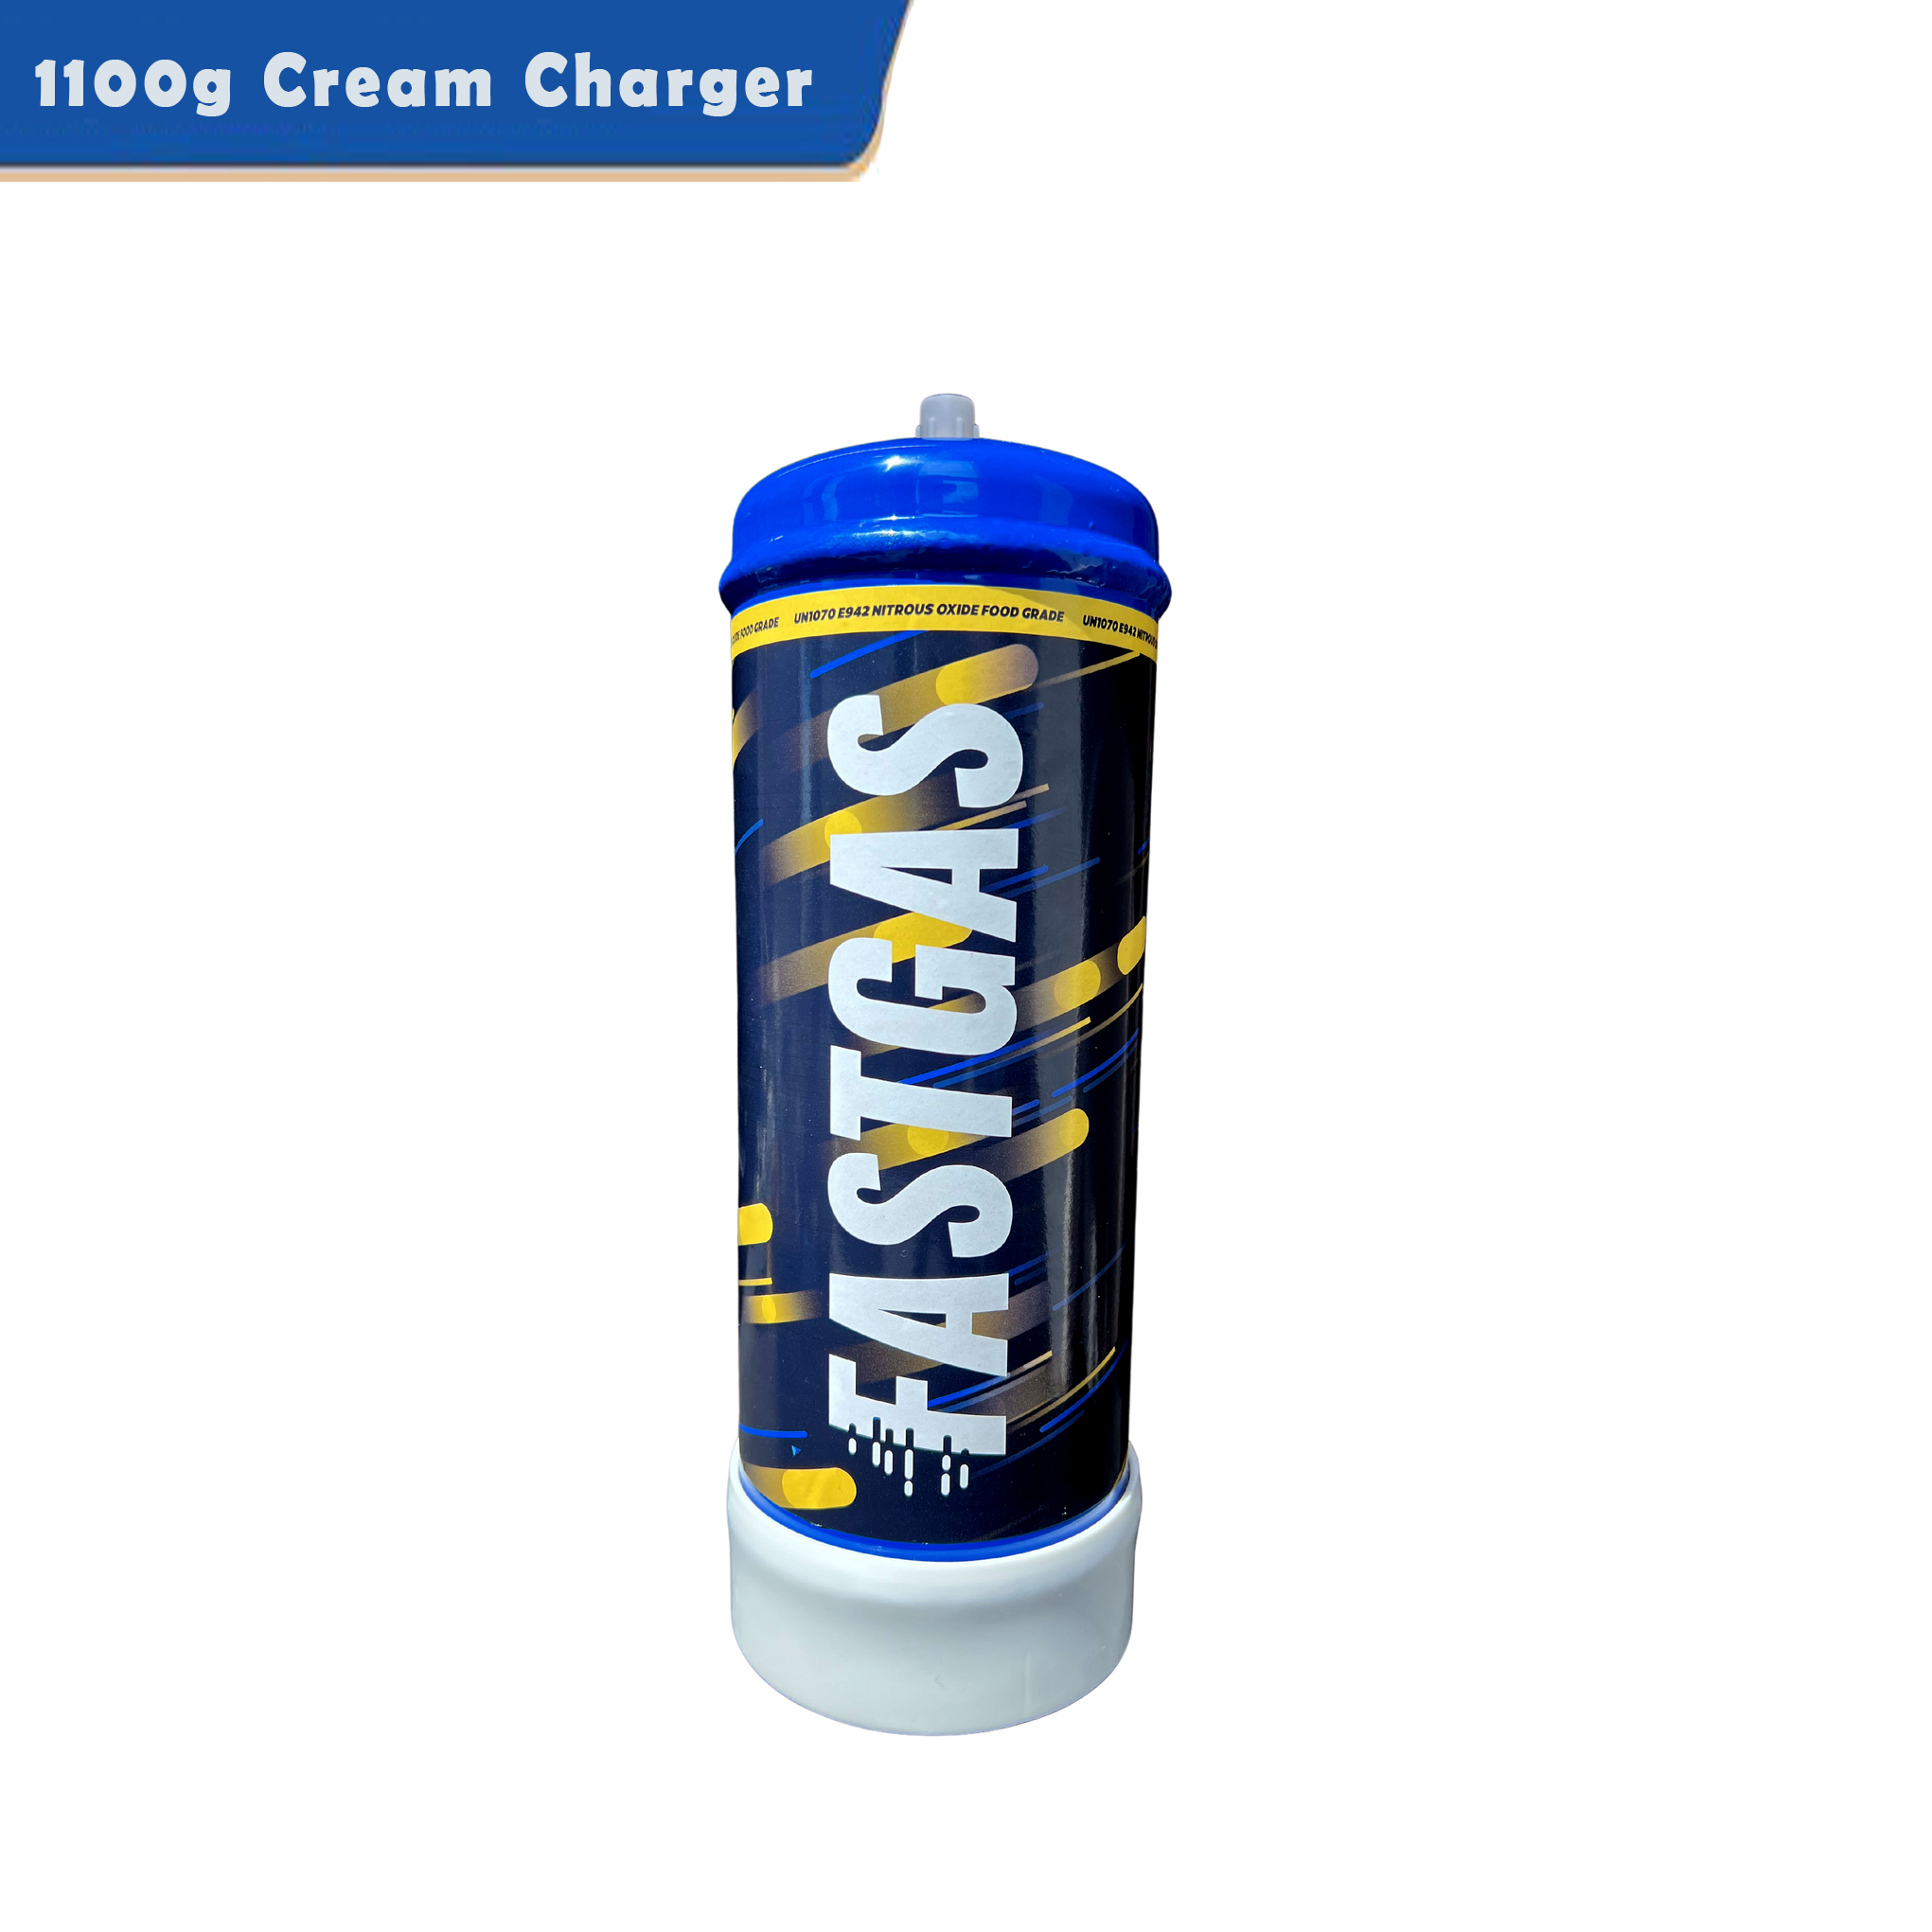 FastGas 2.2L N2O Canister 1100g Cream Charger Tank Wholesale - Free OEM